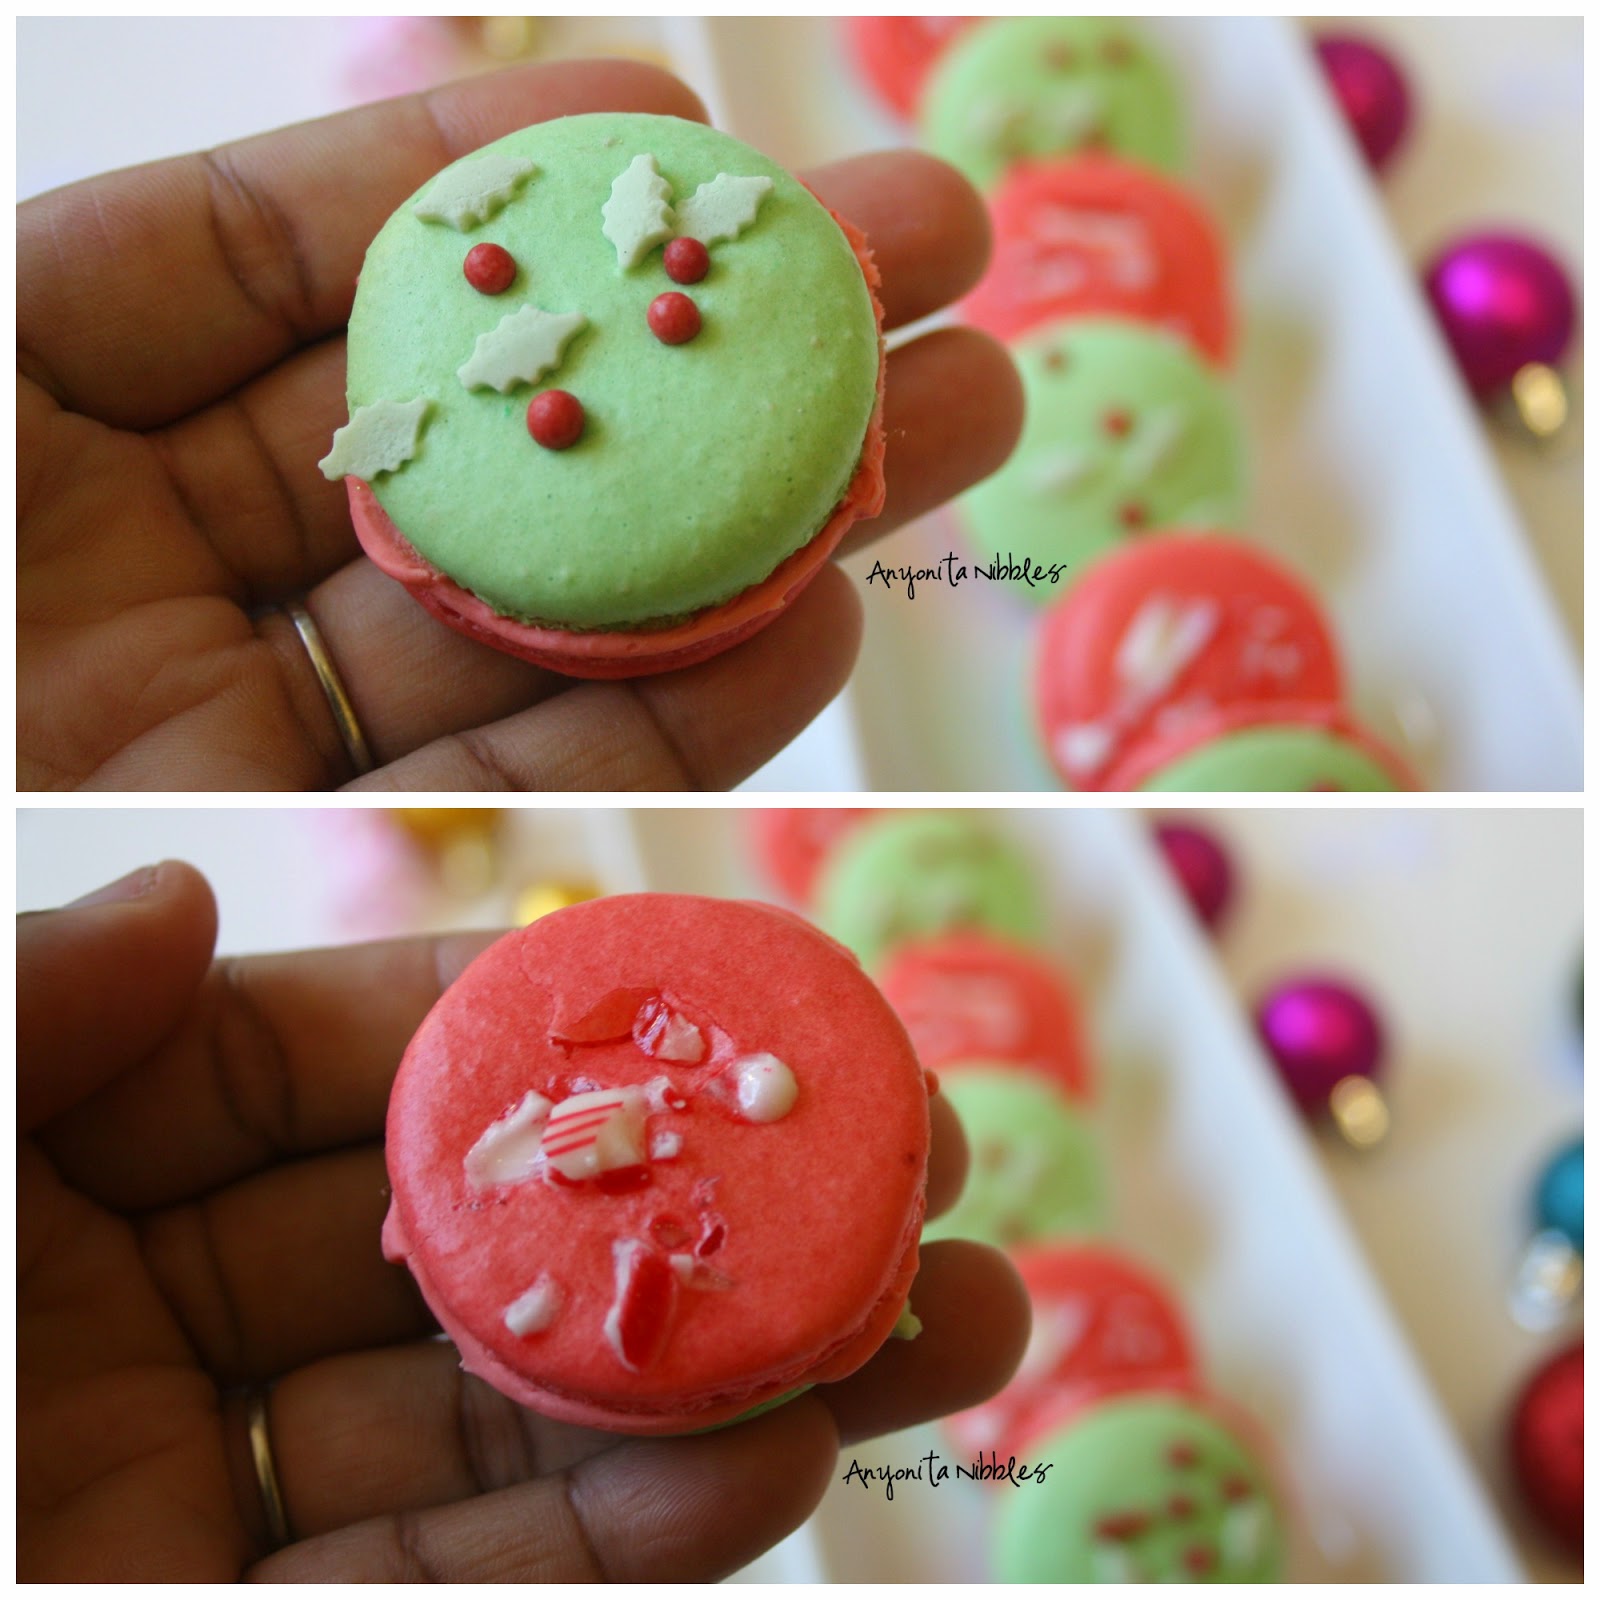 Front and back to a Gluten Free Double Peppermint French Macaron from Anyonita-nibbles.co.uk